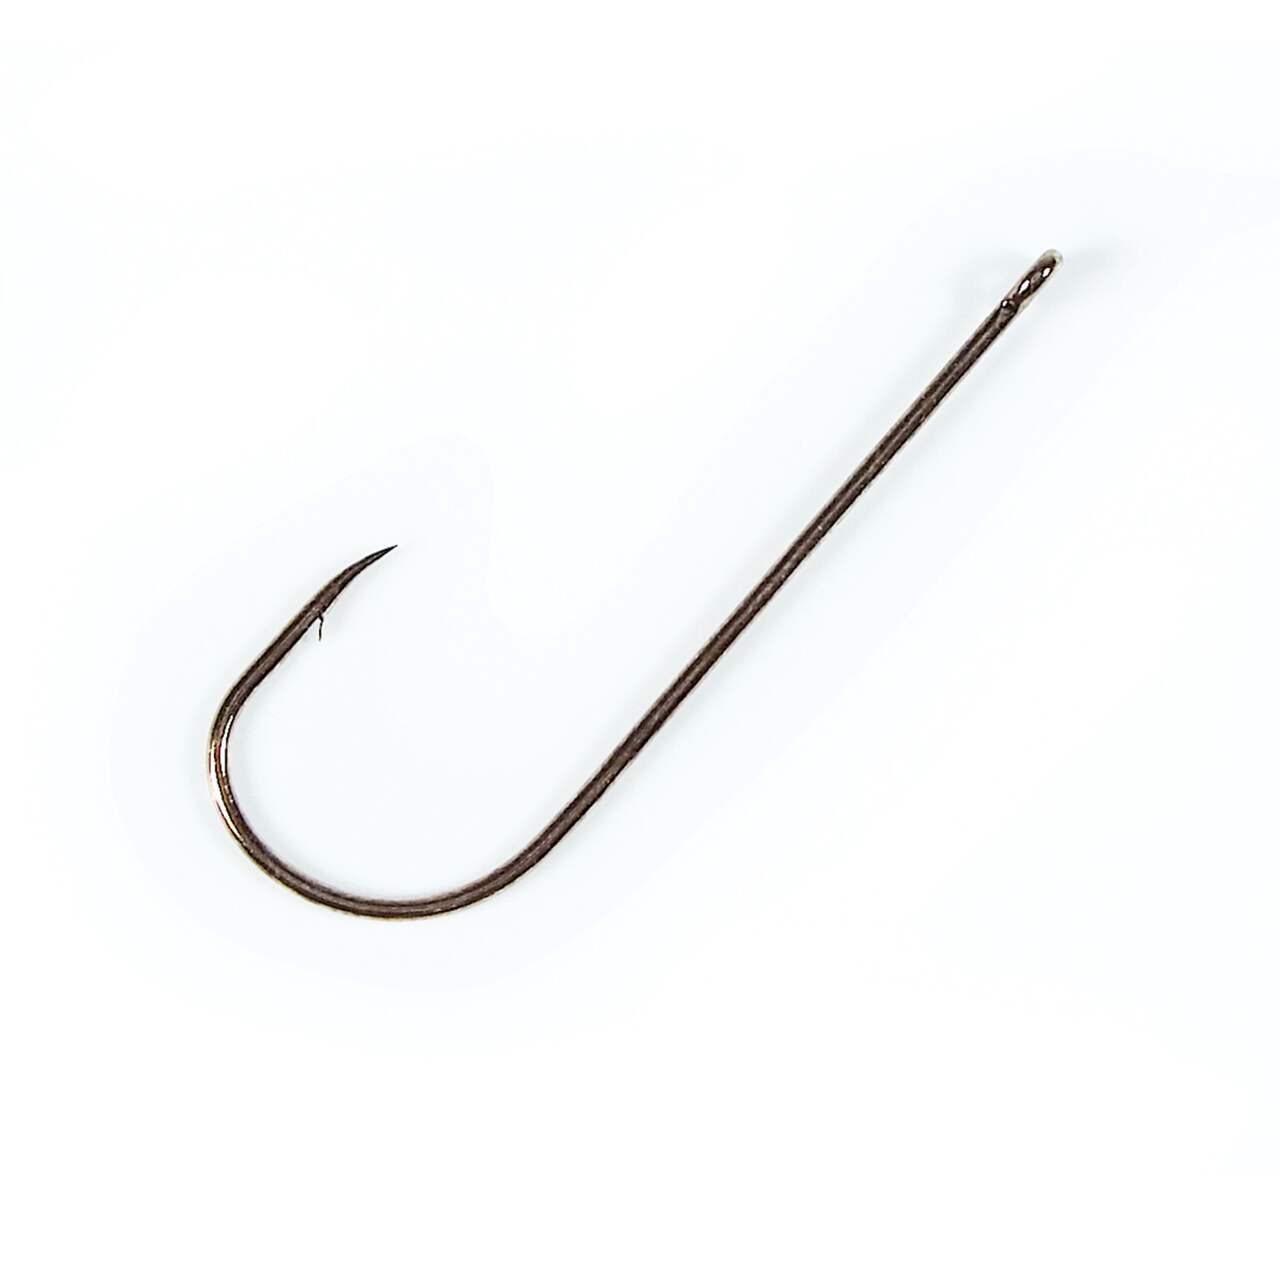 https://media-www.canadiantire.ca/product/playing/fishing/fishing-lures/1781224/gamakatsu-aberdeen-hook-bronze-10-pack-size-10-3a74011e-f605-4f9a-825d-071e18ef0d6a-jpgrendition.jpg?imdensity=1&imwidth=640&impolicy=mZoom